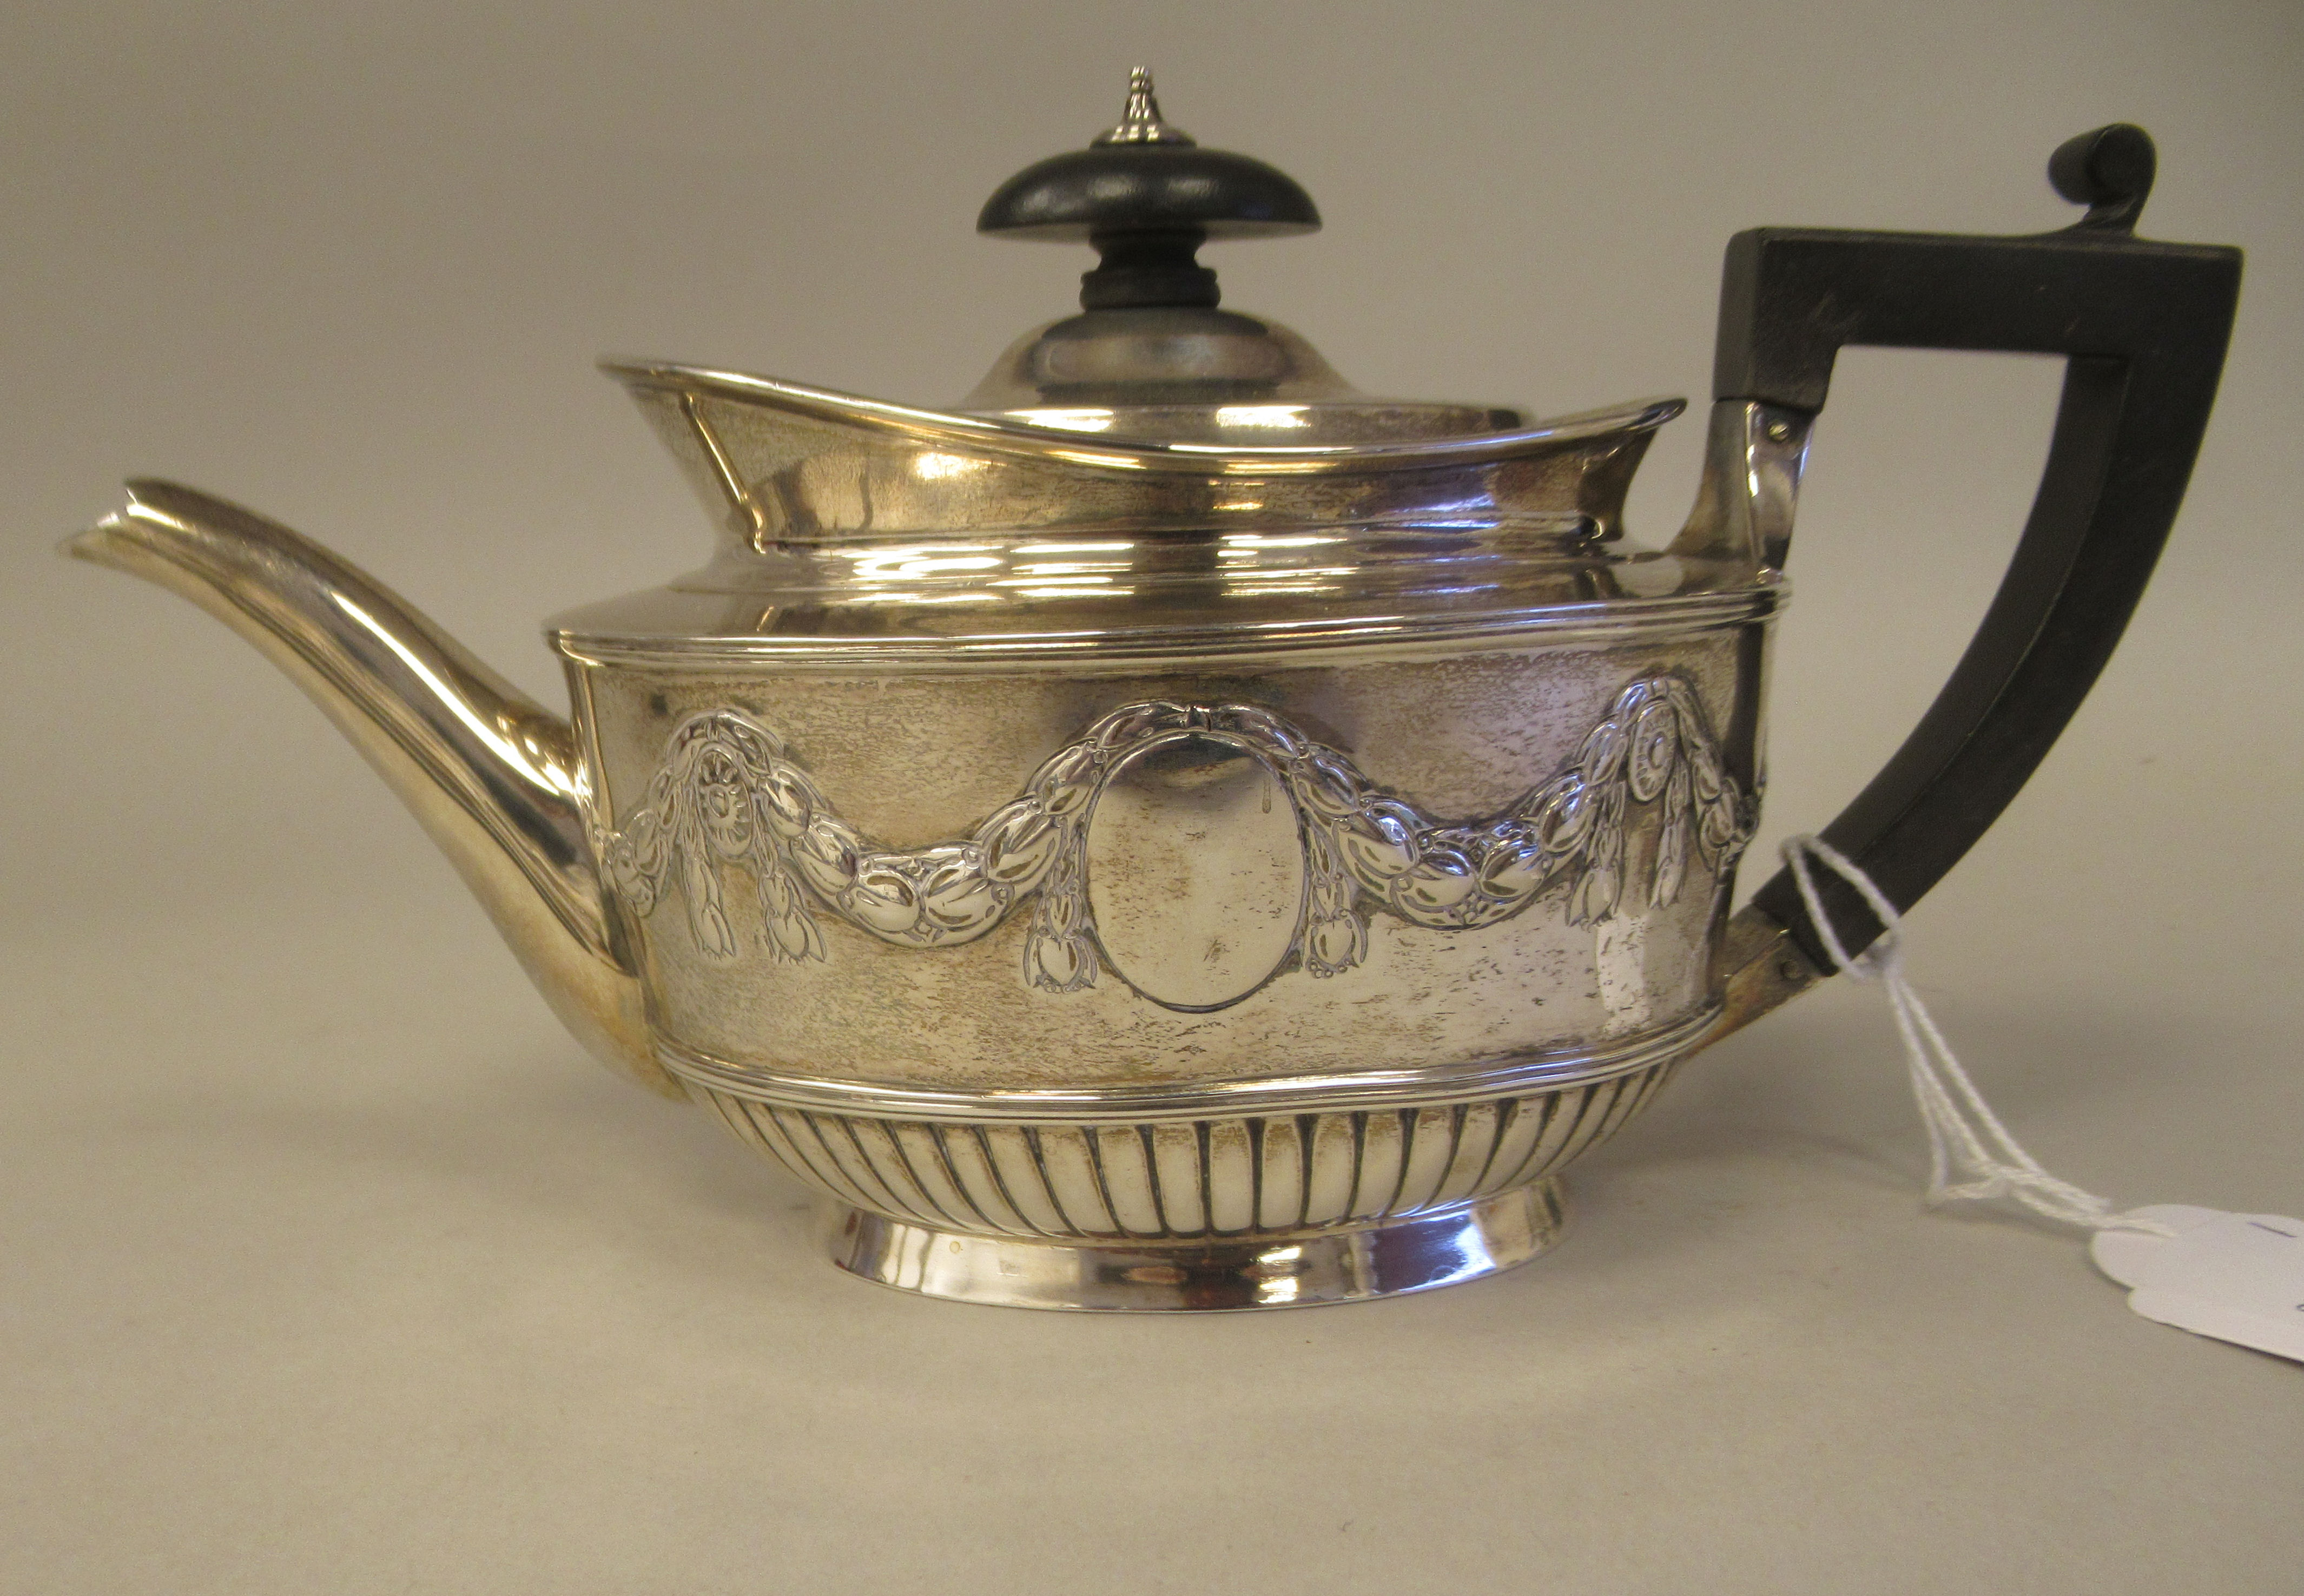 A late Victorian silver batchelors oval teapot with embossed garlands, drapes and demi-reeded